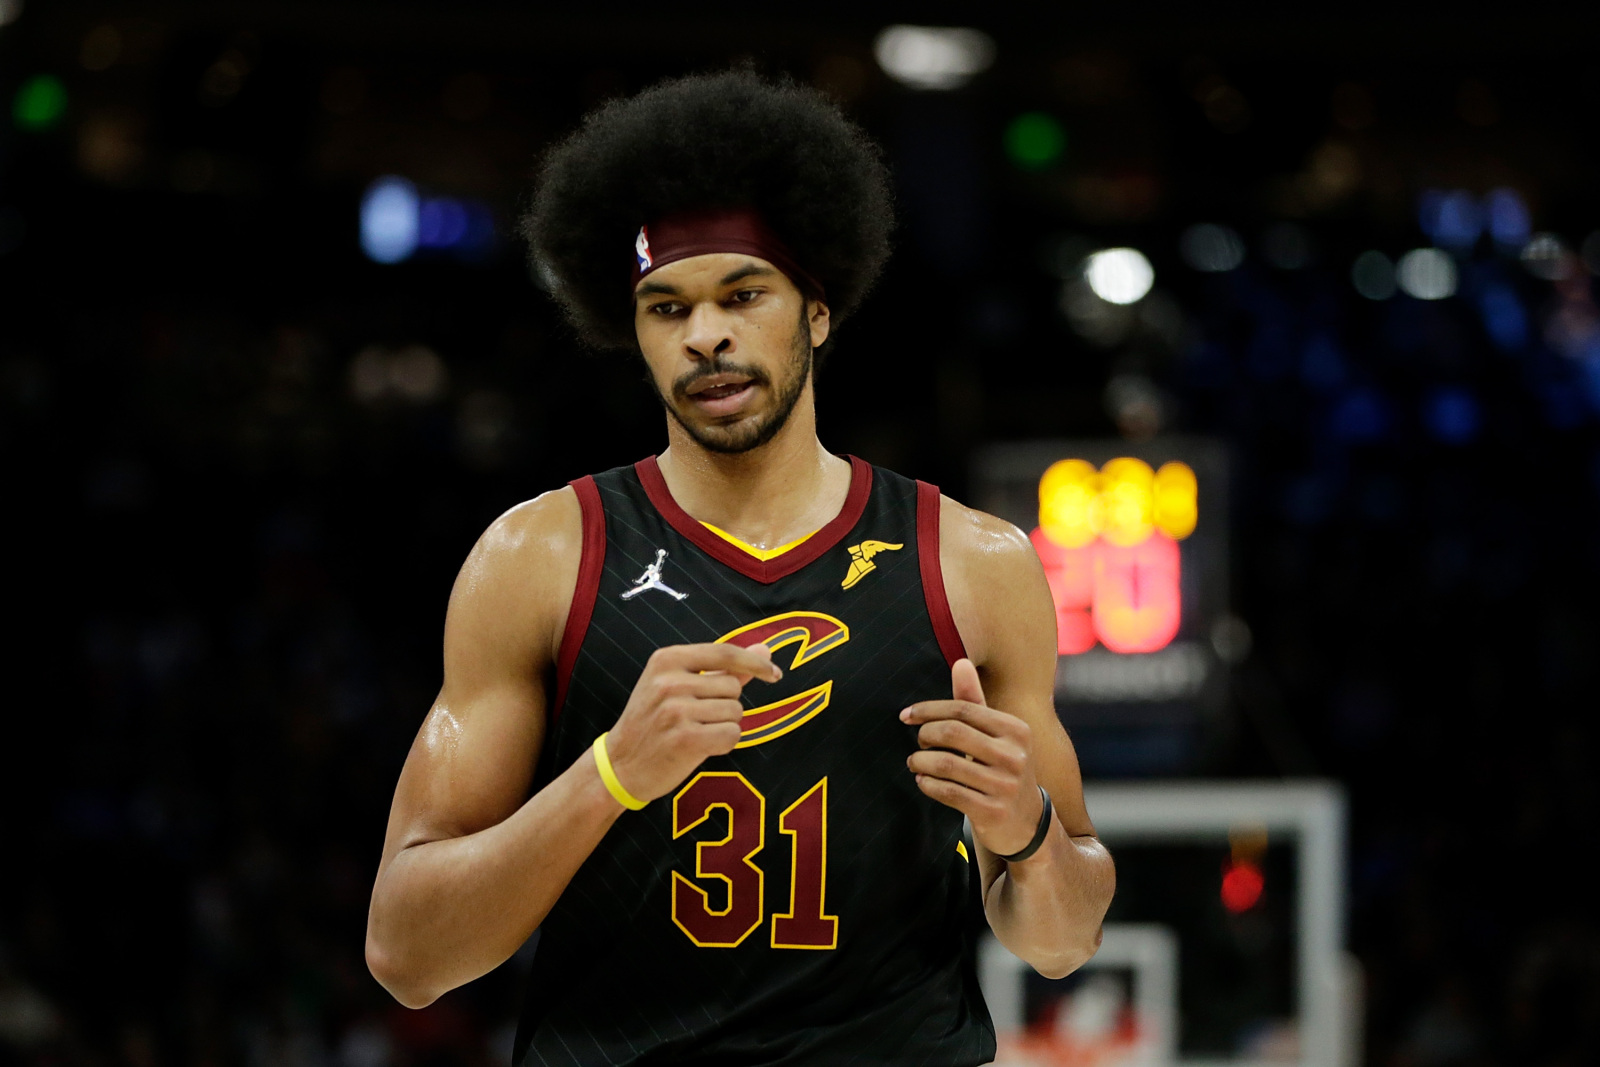 Are Jarrett Allen's lower numbers a concern? Will the Cavs make a